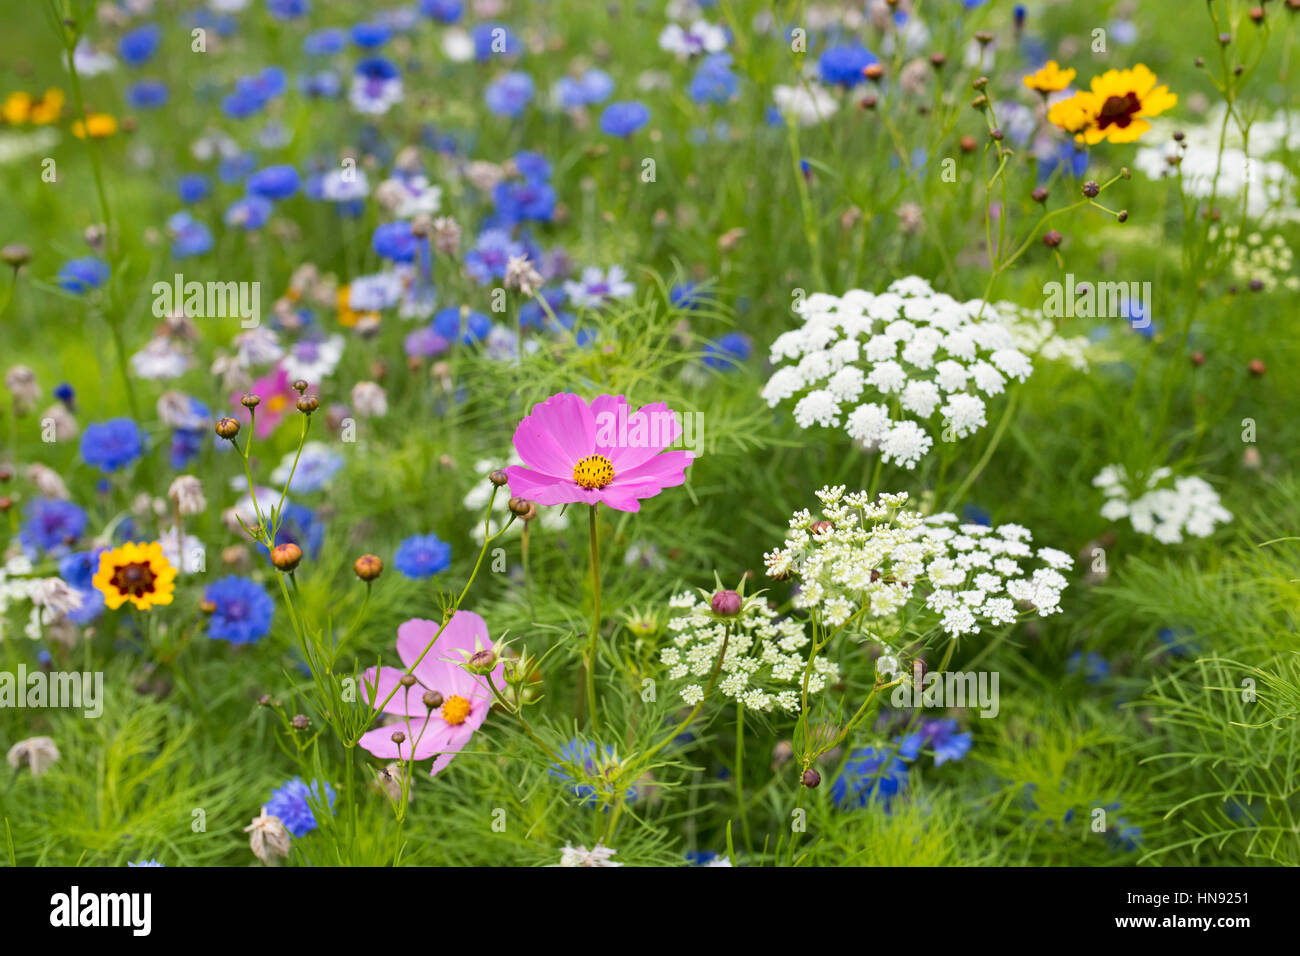 Natural wildflowers on display. Stock Photo